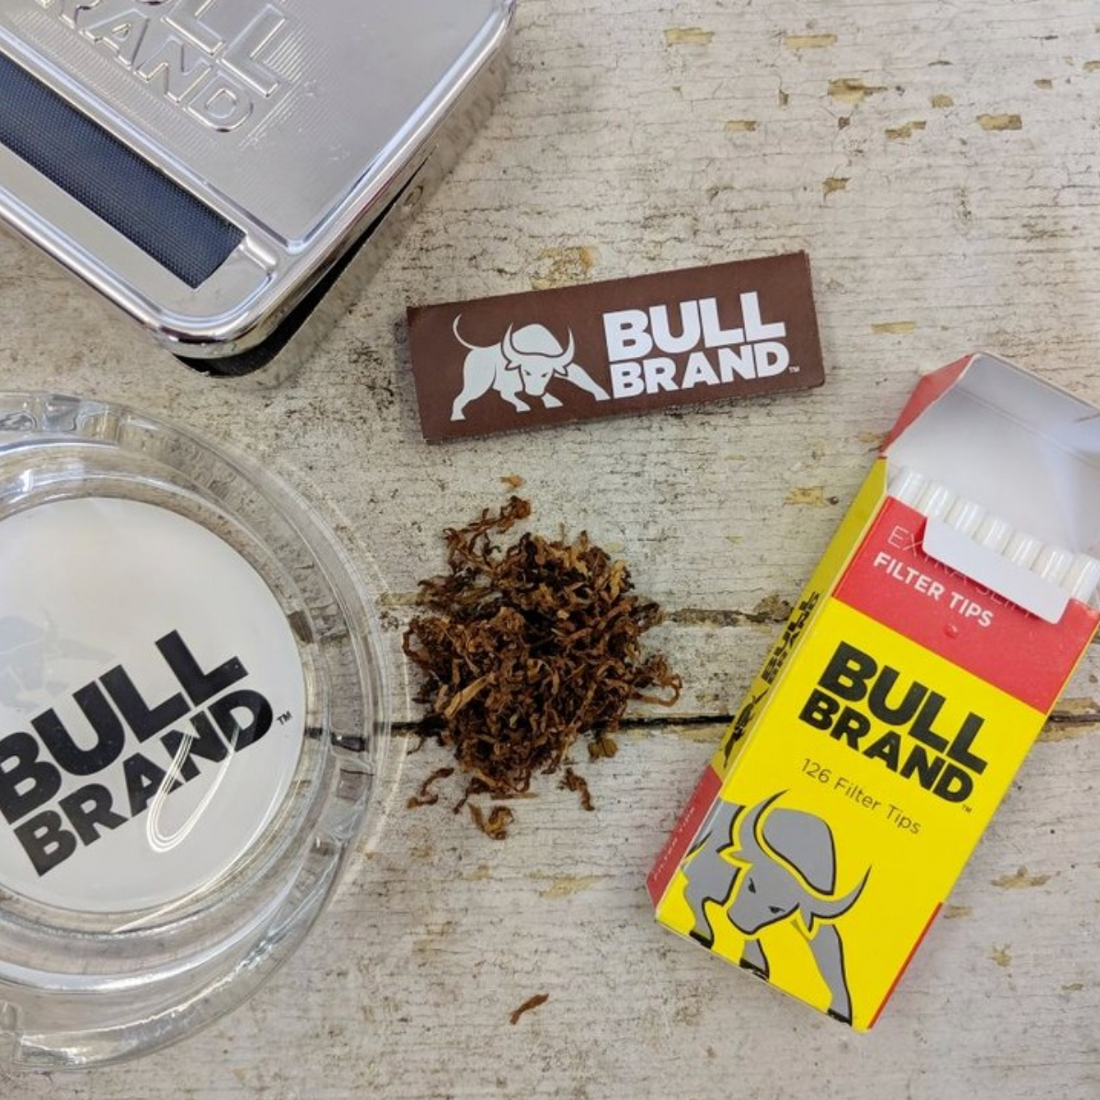 Where to buy cheap hand-rolling tobacco, papers and filters online?